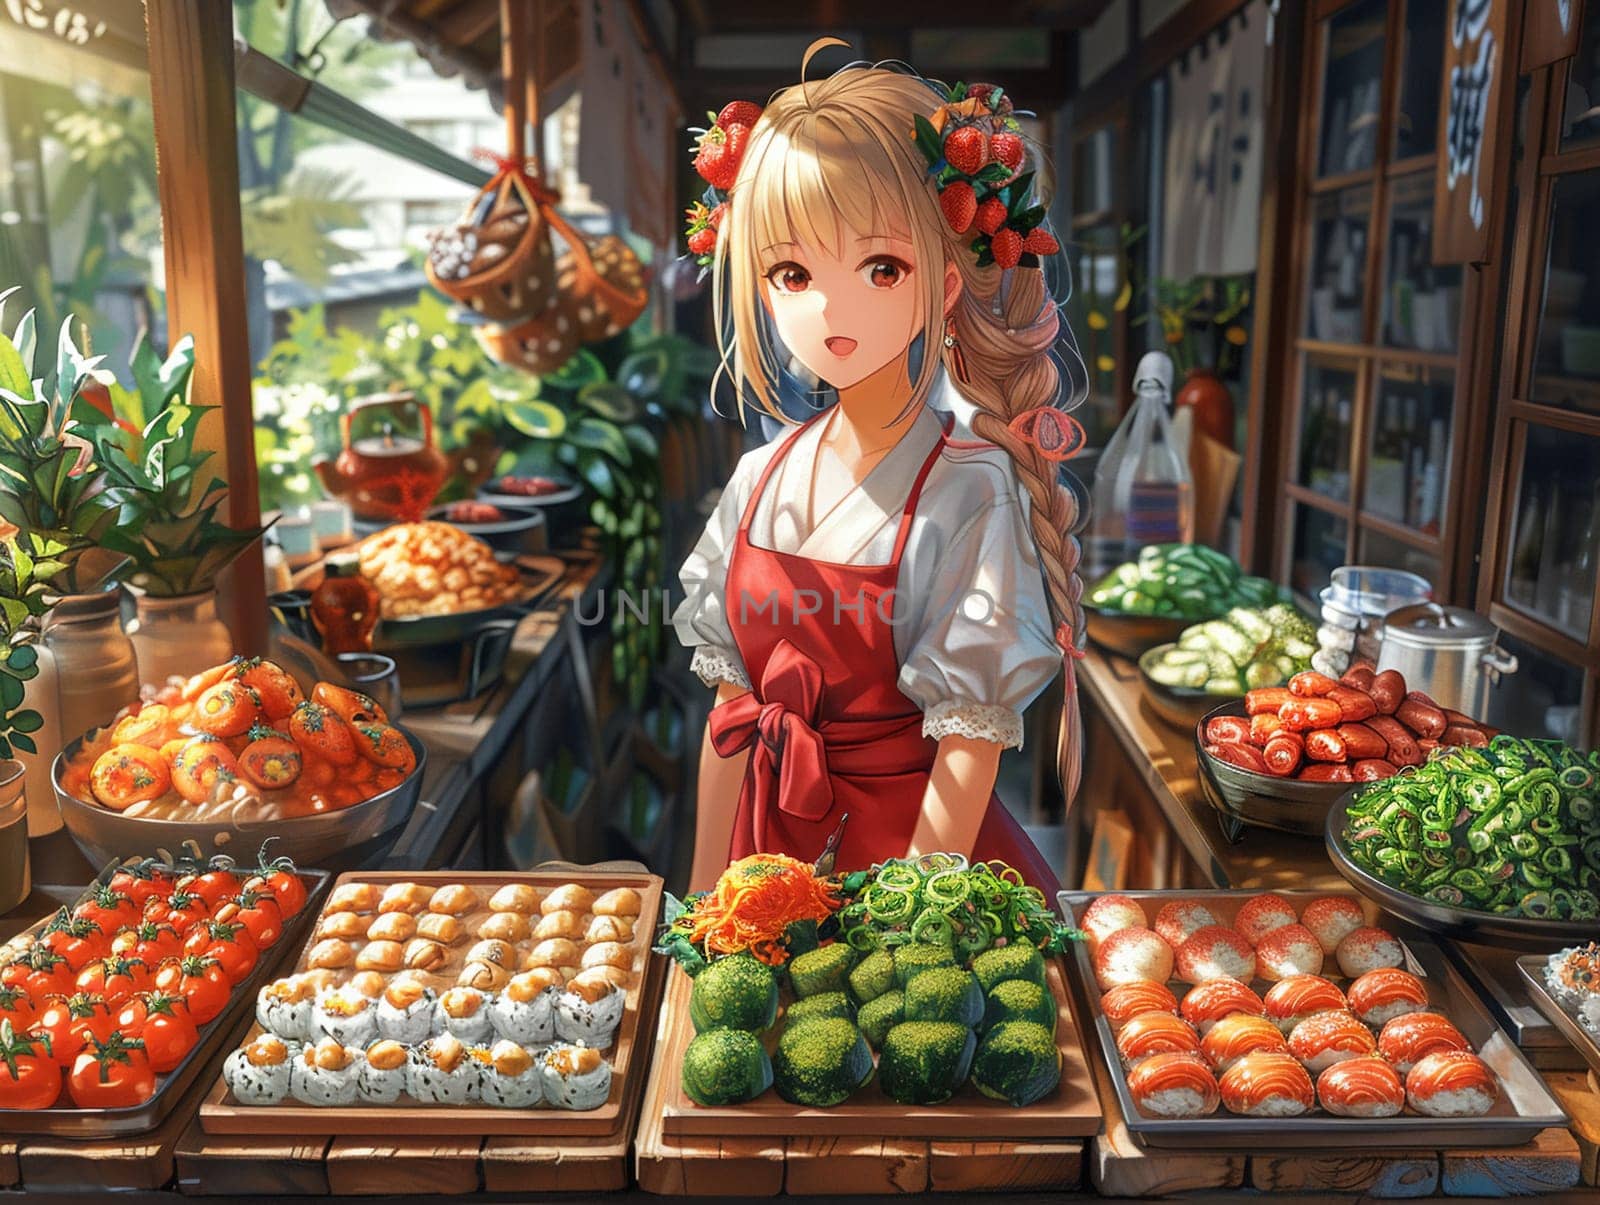 Food festival in anime style by Benzoix